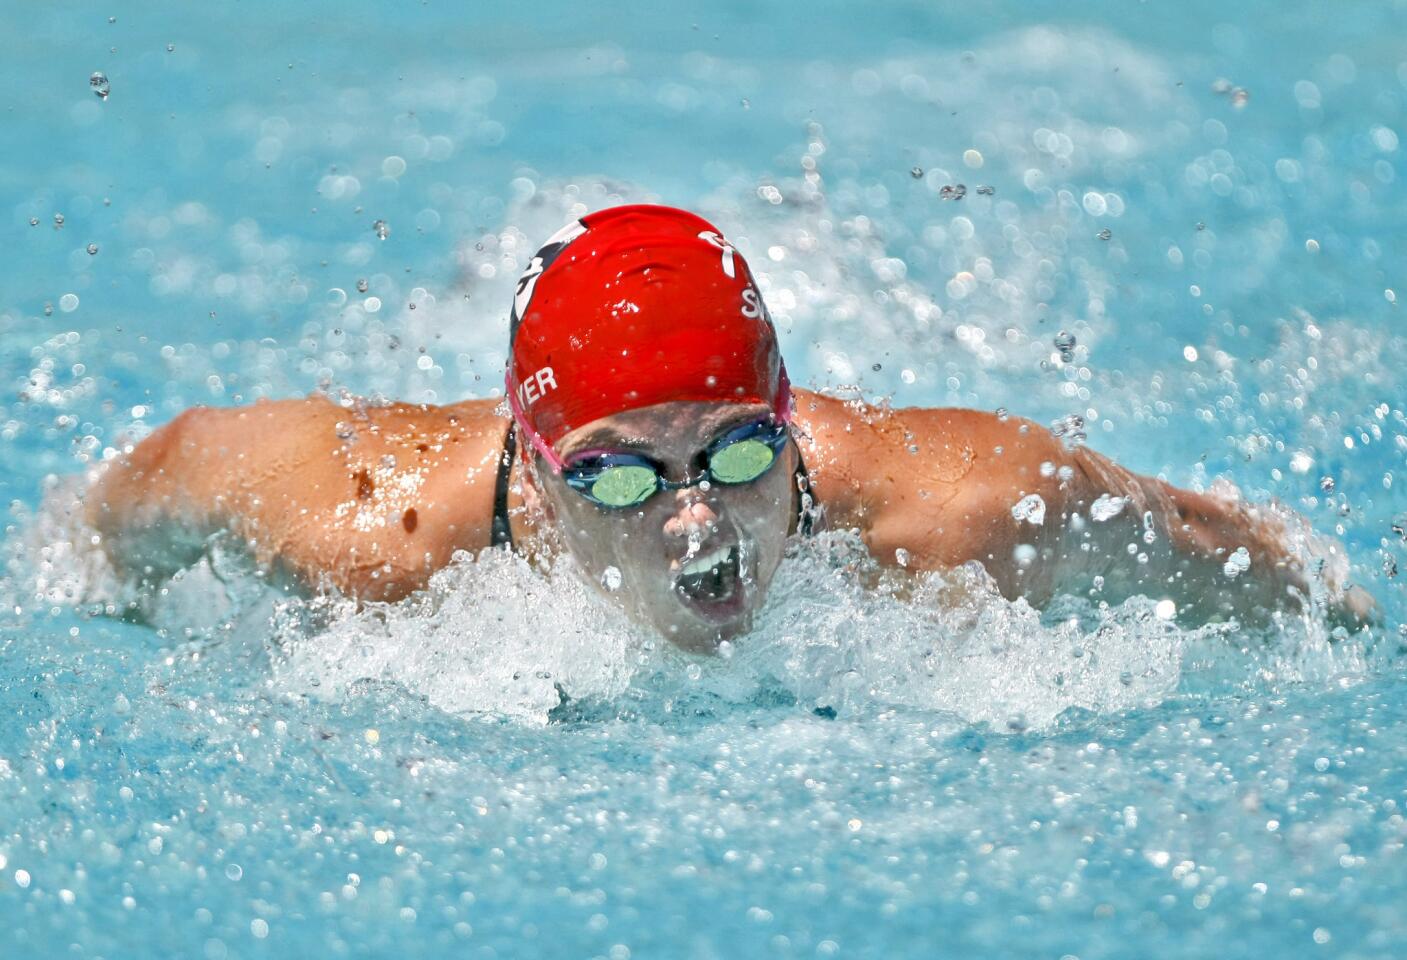 Flintridge Sacred Heart Academy's senior Katie Altmayer wins the girls varsity 100 yard butterfly race in the 2014 Mission League Championship Meet at the Rose Bowl Aquatic Center in Pasadena on Tuesday, April 29, 2014.